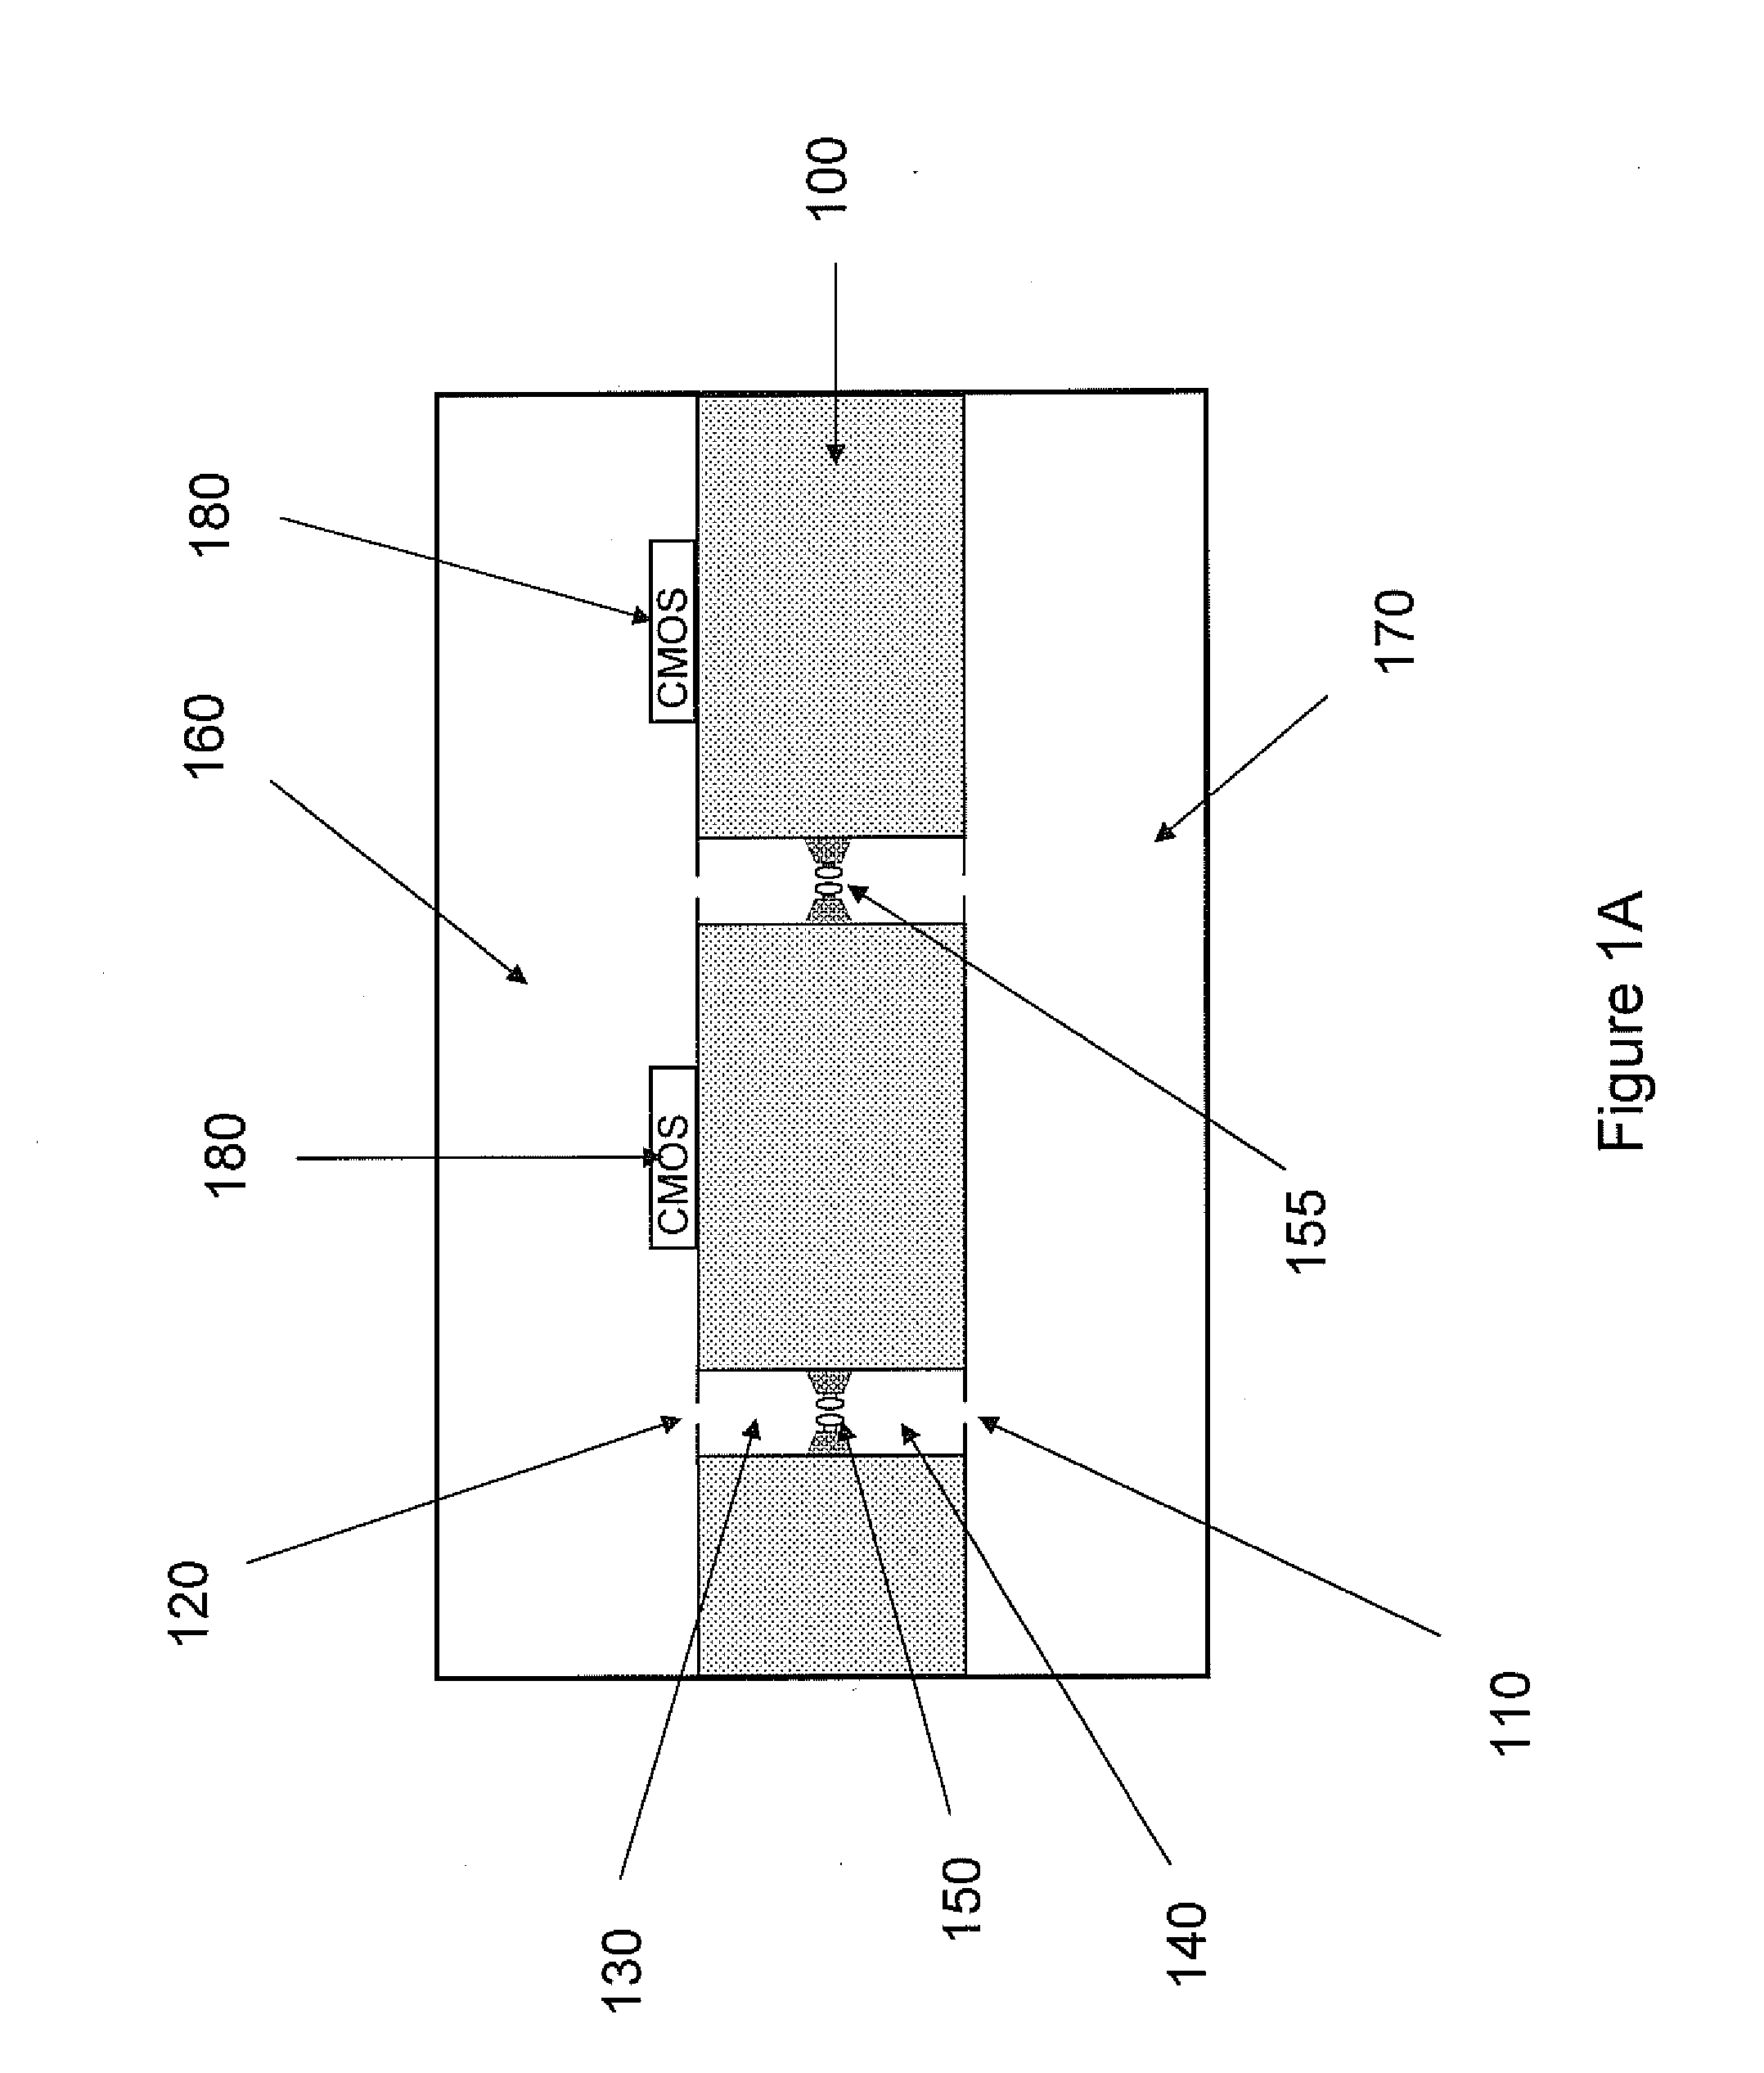 Nanopore sequencing devices and methods